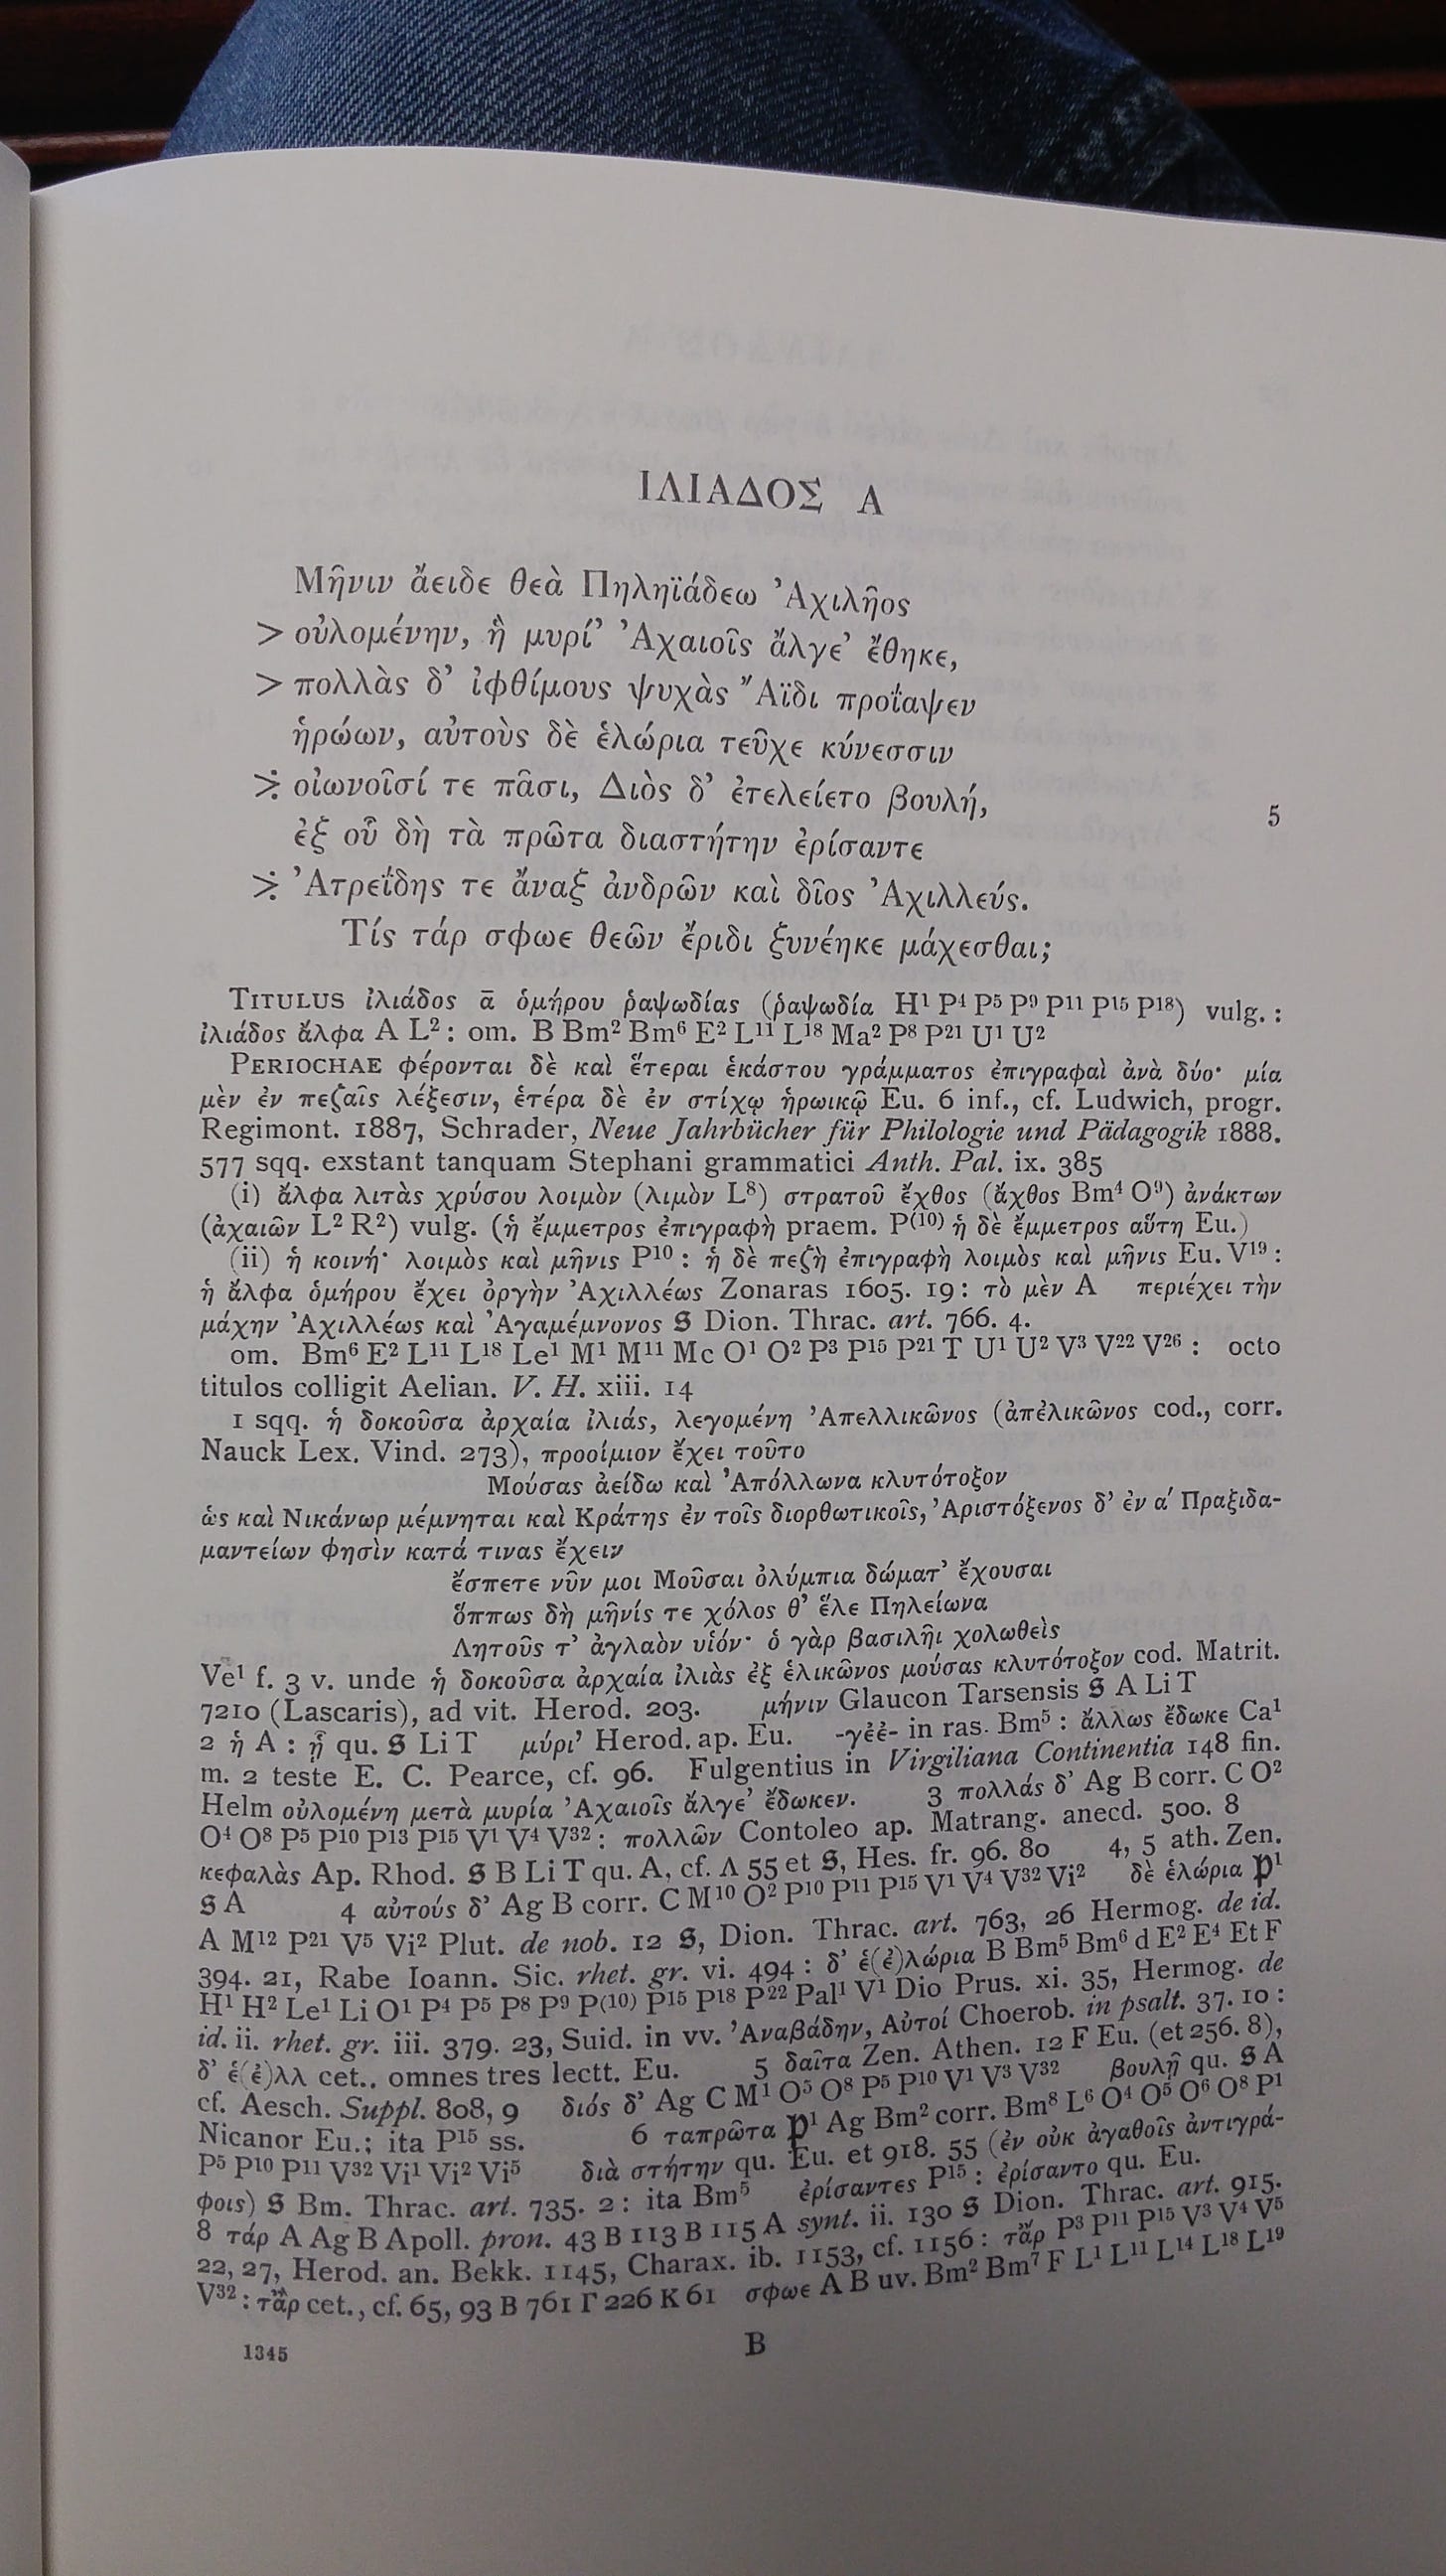 A photograph of Allen's OCT of the Iliad, page 1